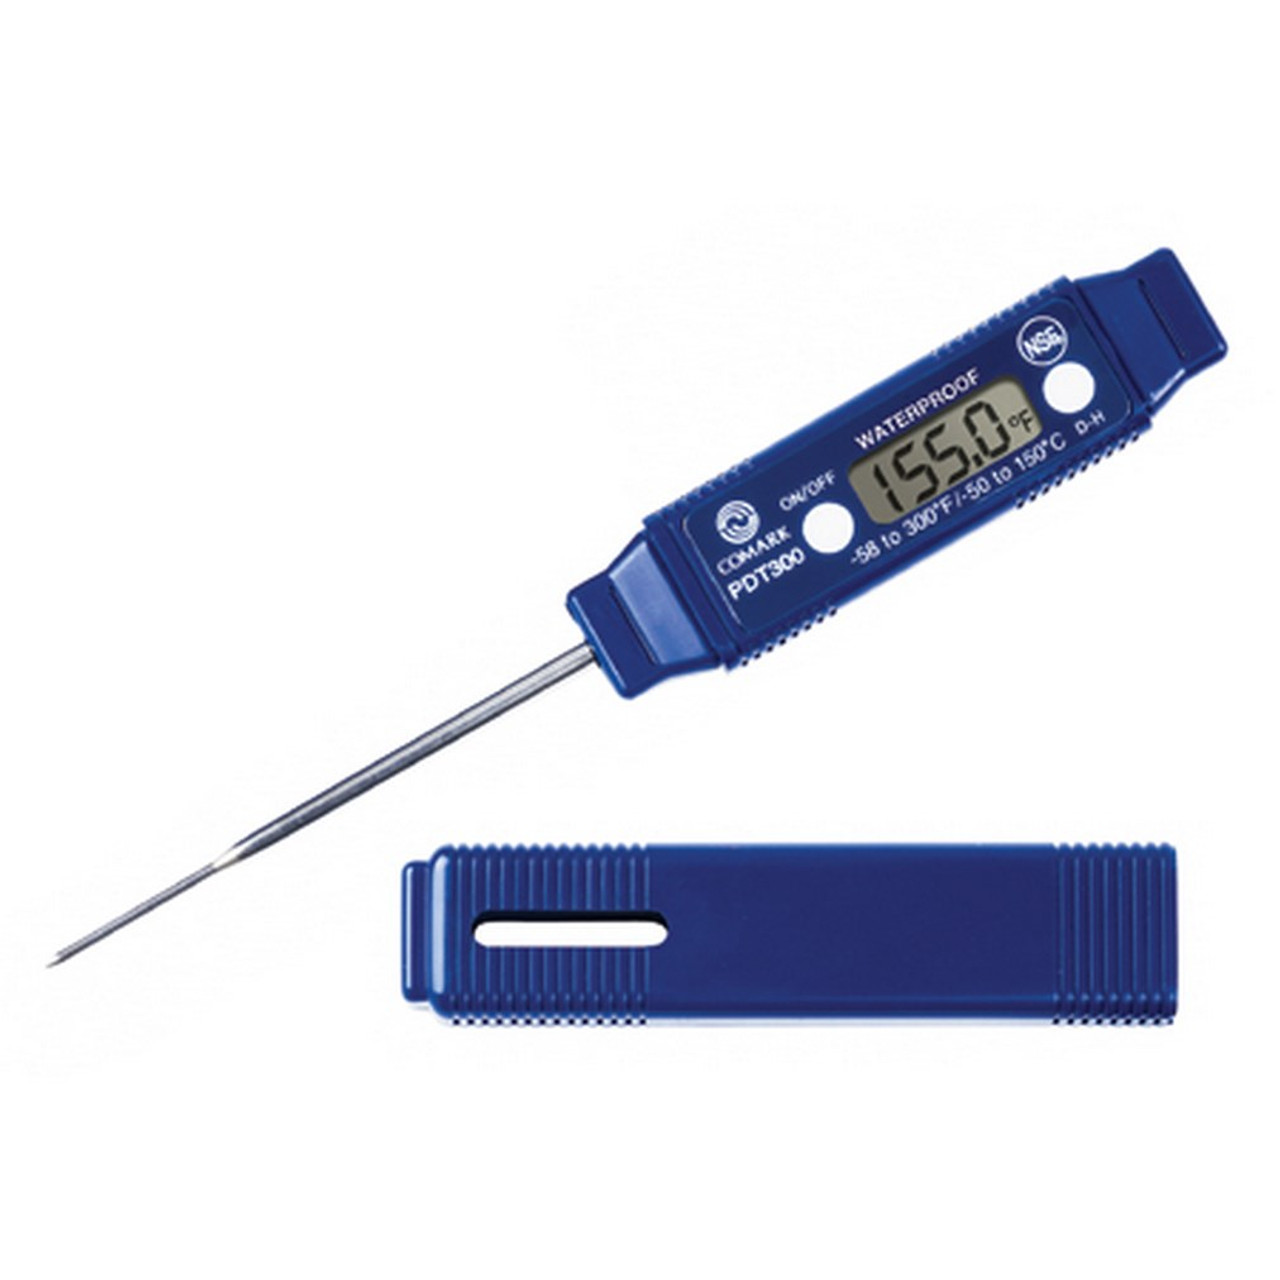 Control Company Traceable Full-Scale Thermometers